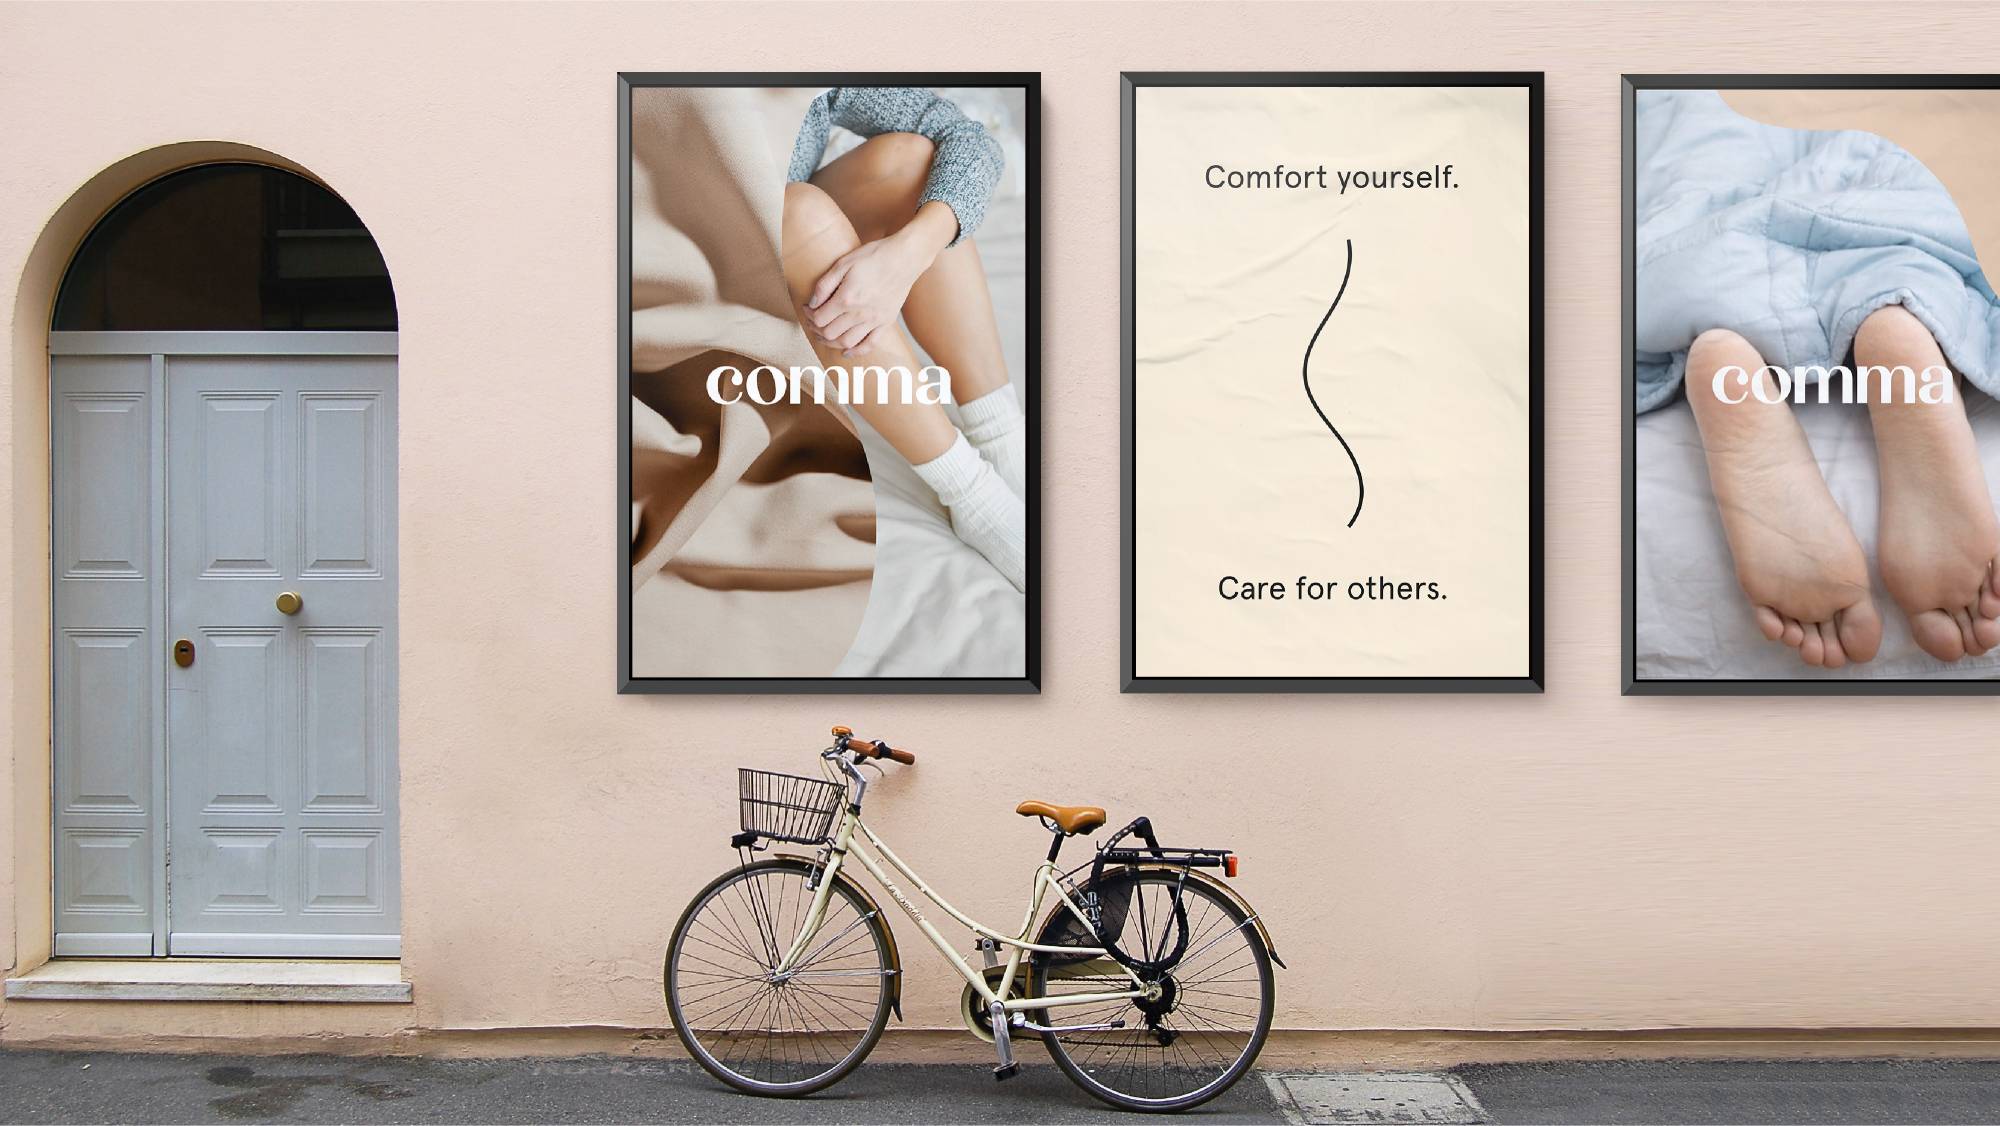 Elmwood New York Crafts Brand Identity for Bedding Start-Up Comma Home